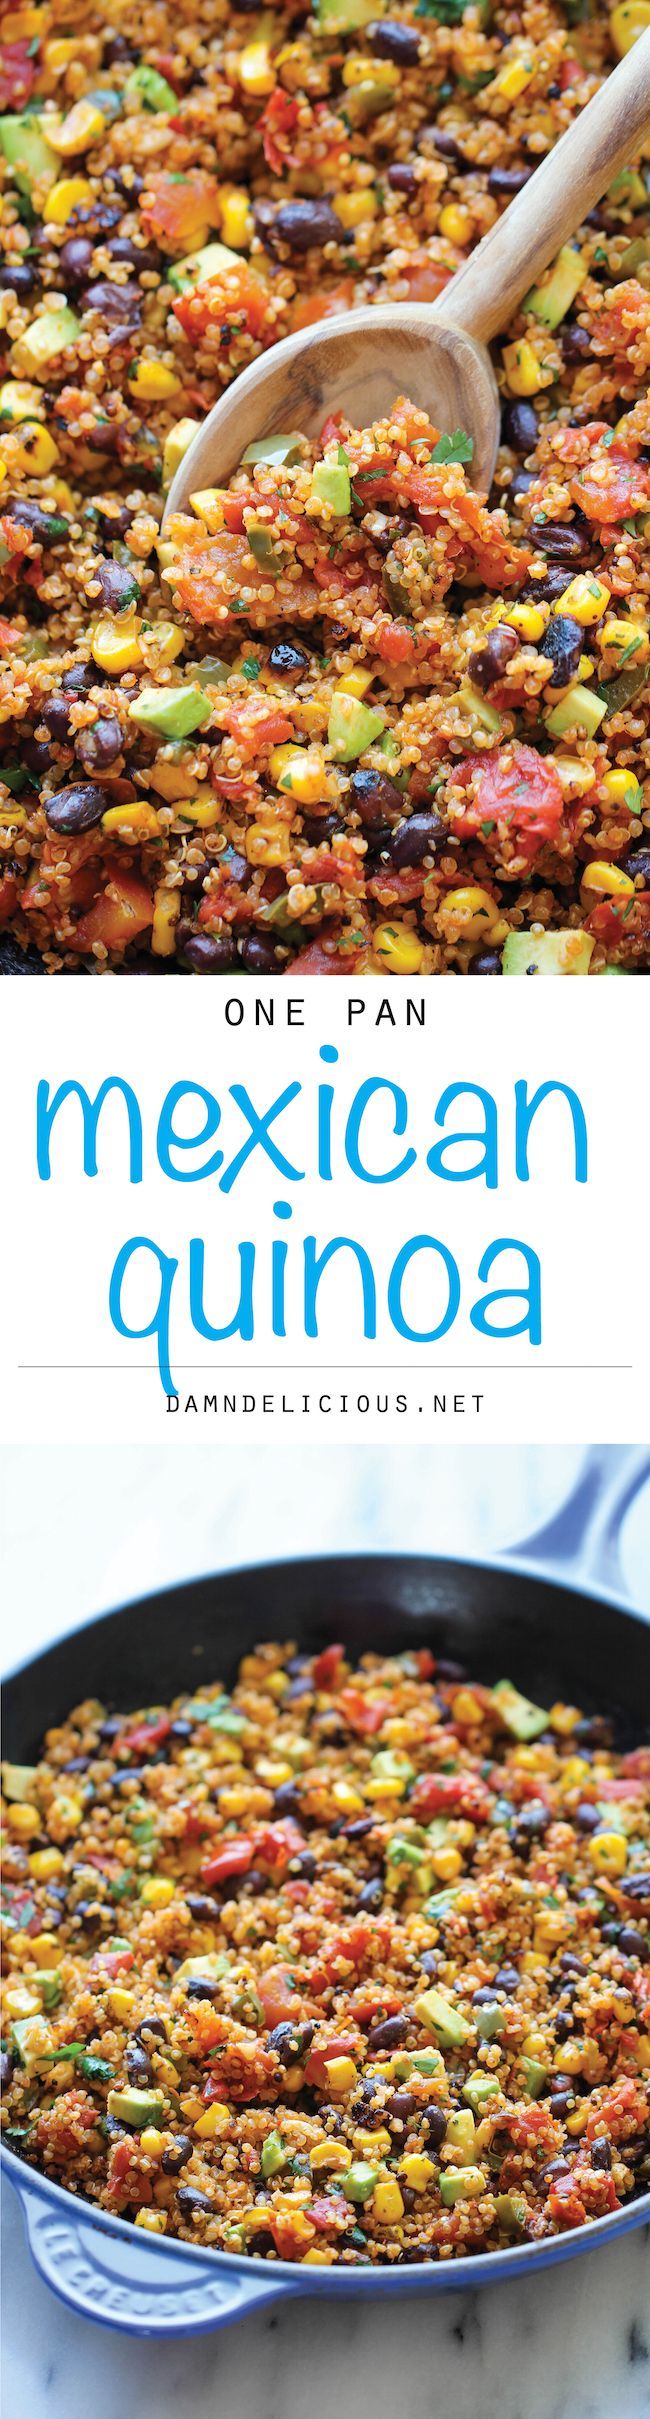 One Pan Mexican Quinoa – Wonderfully light, healthy and nutritious. And its so easy to make – even the quinoa is cooked right in